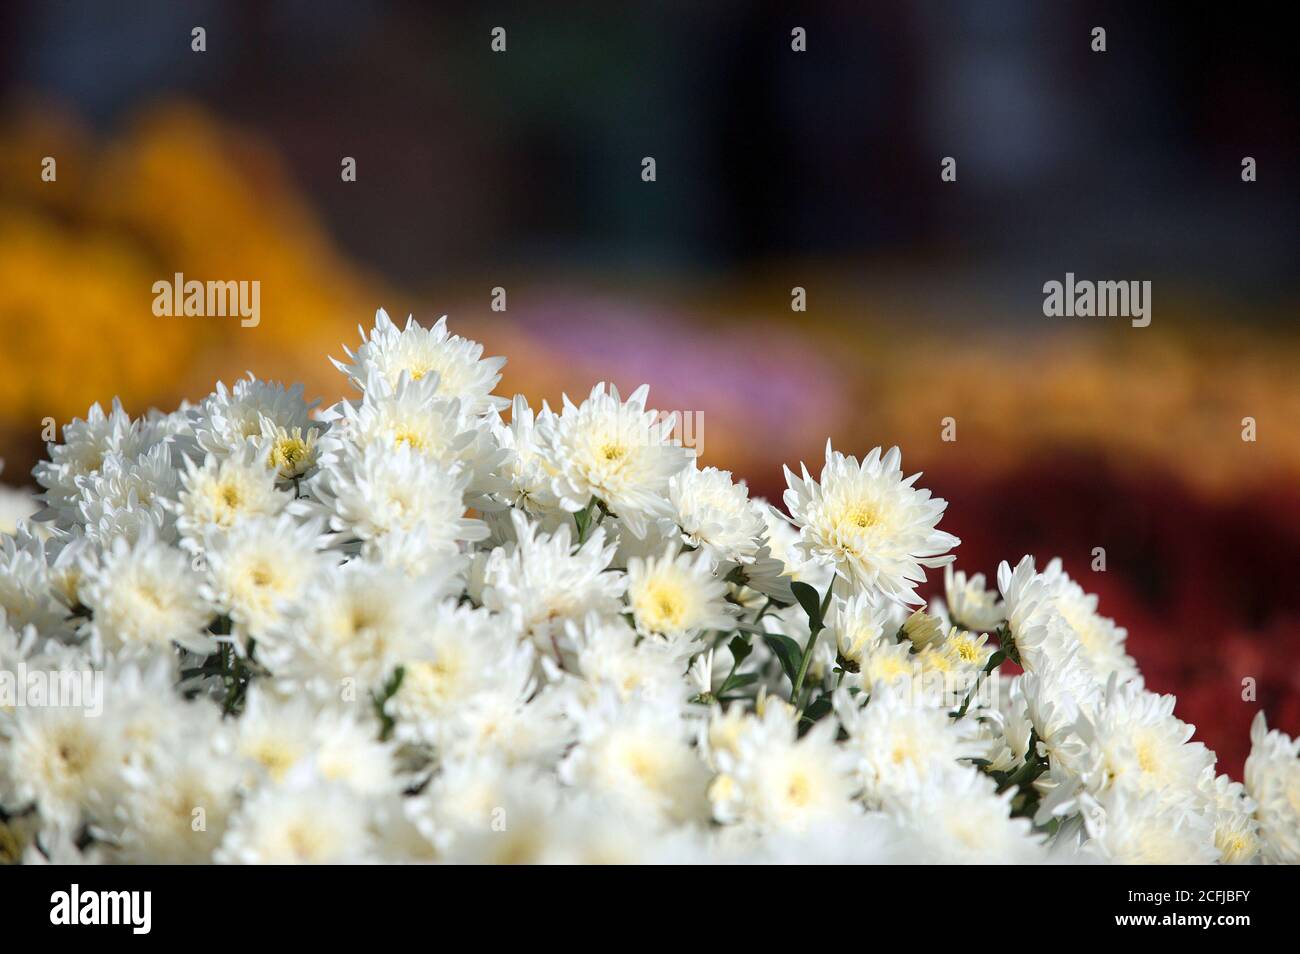 Chrysanthema is the name of a festival with flowers and chrysanthemums that takes place regularly in October and November in downtown Lahr. Stock Photo